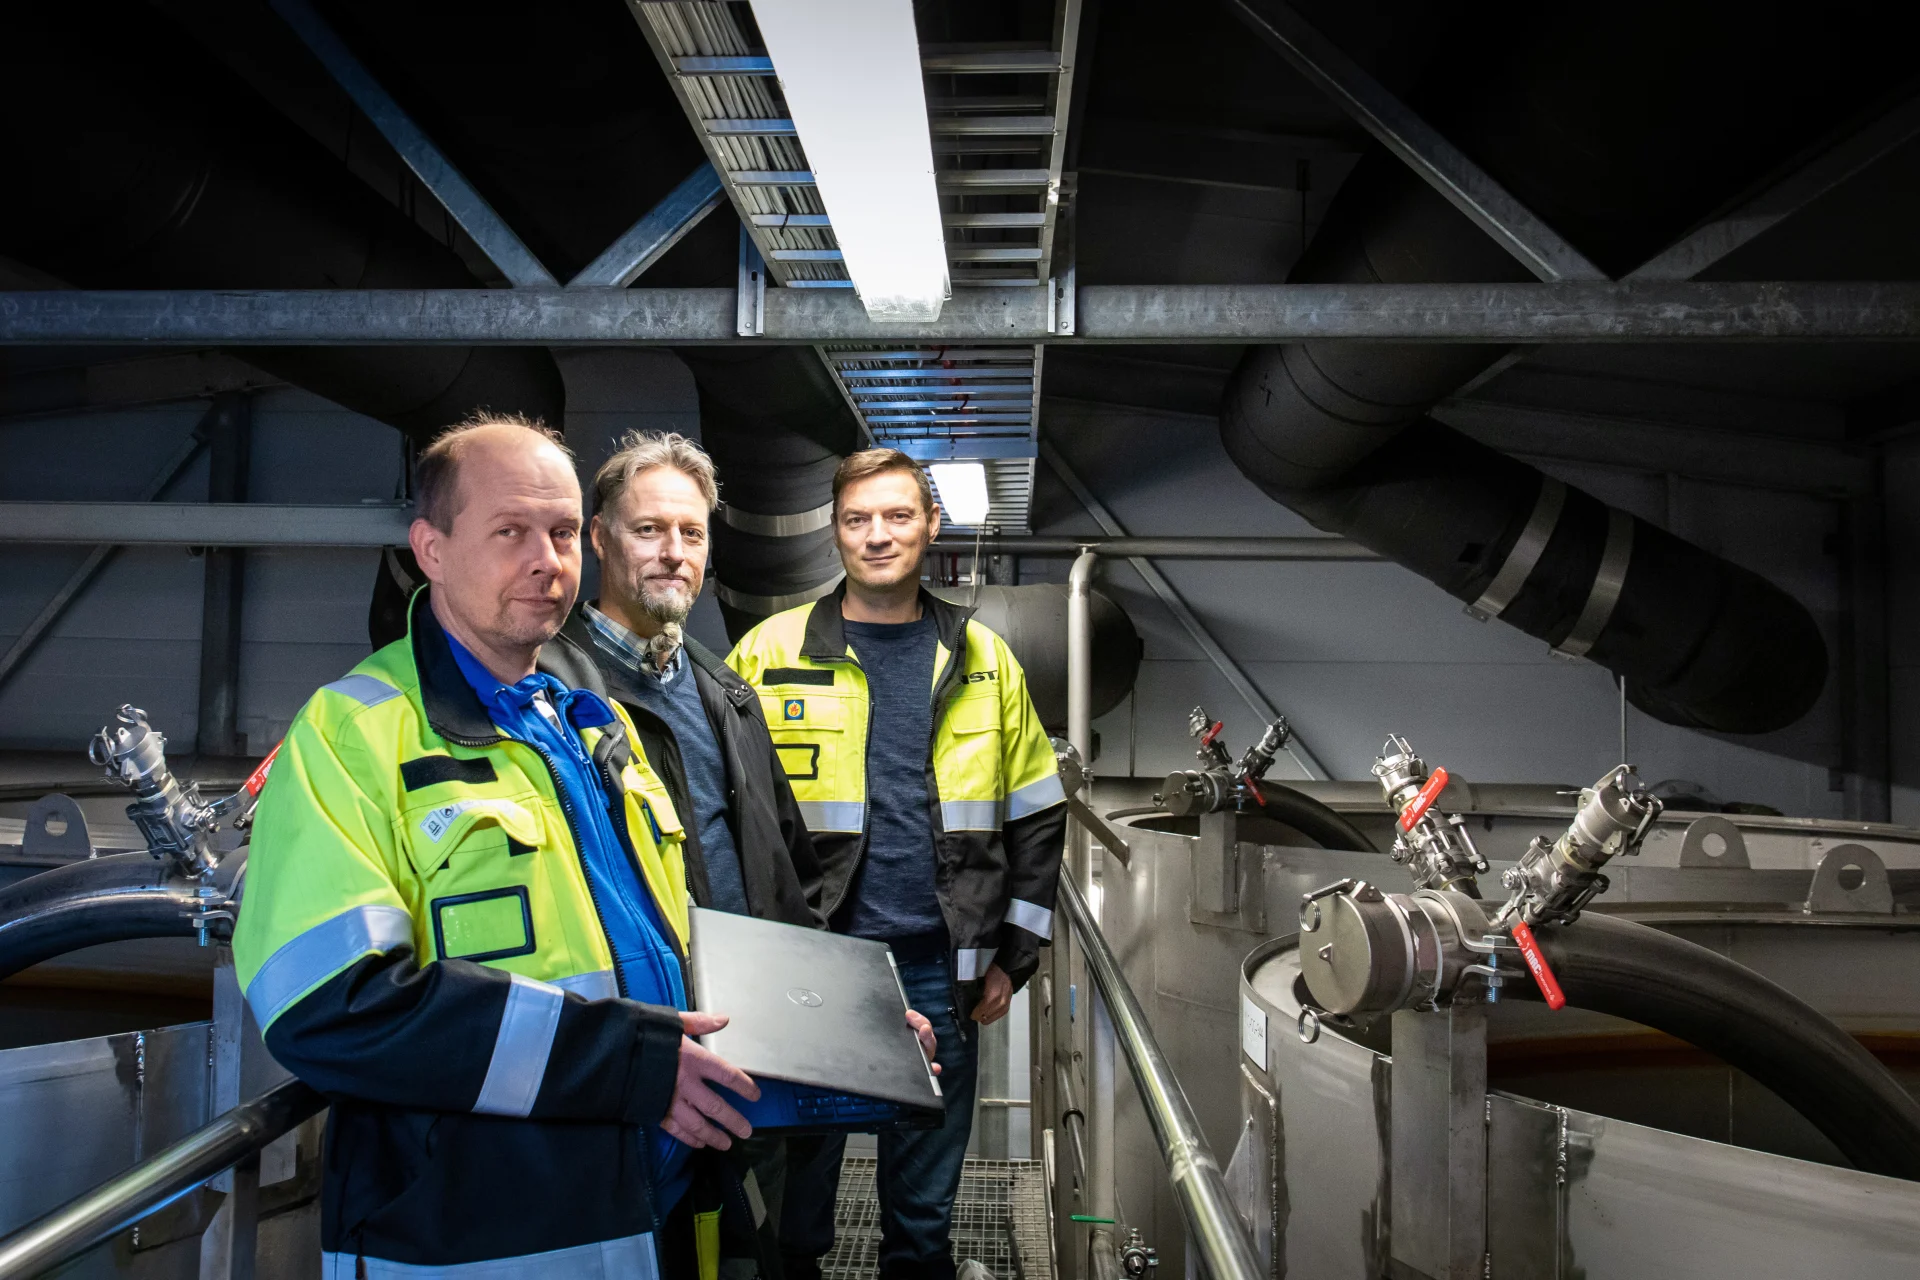 Two employees of Insta and a customer at Tampere Water's Mustalammi water intake.